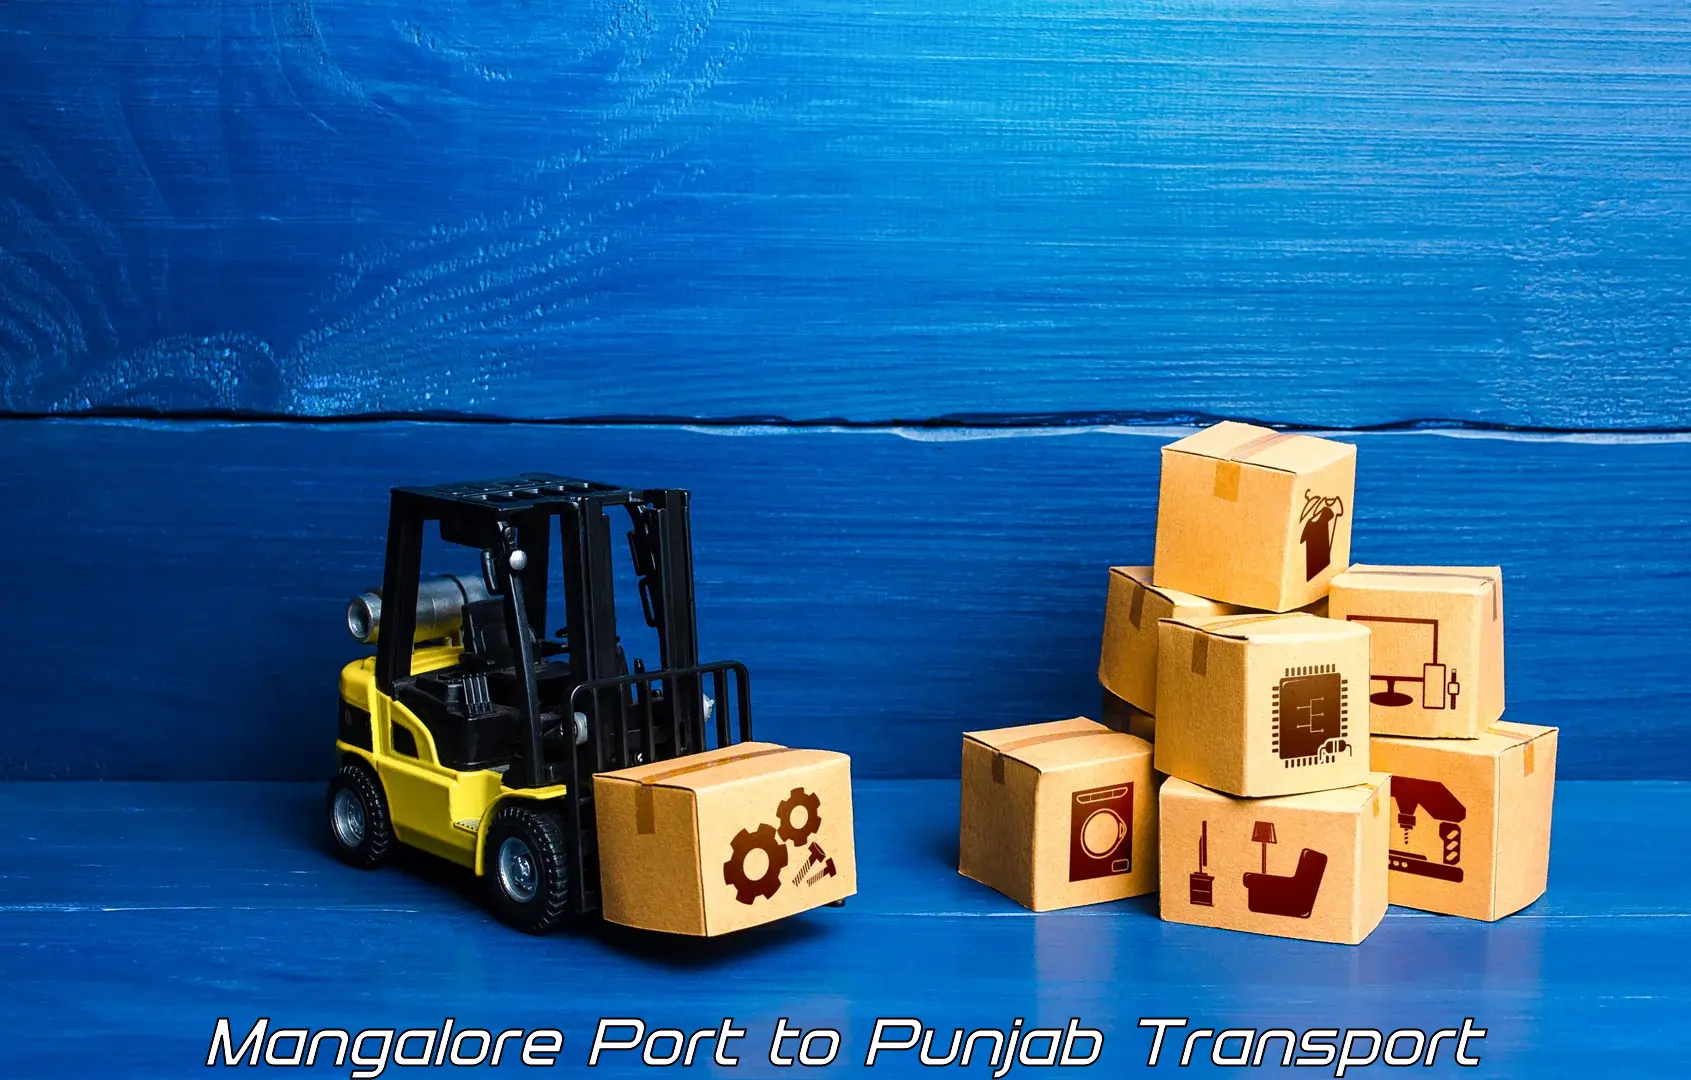 Best transport services in India Mangalore Port to Tarsikka